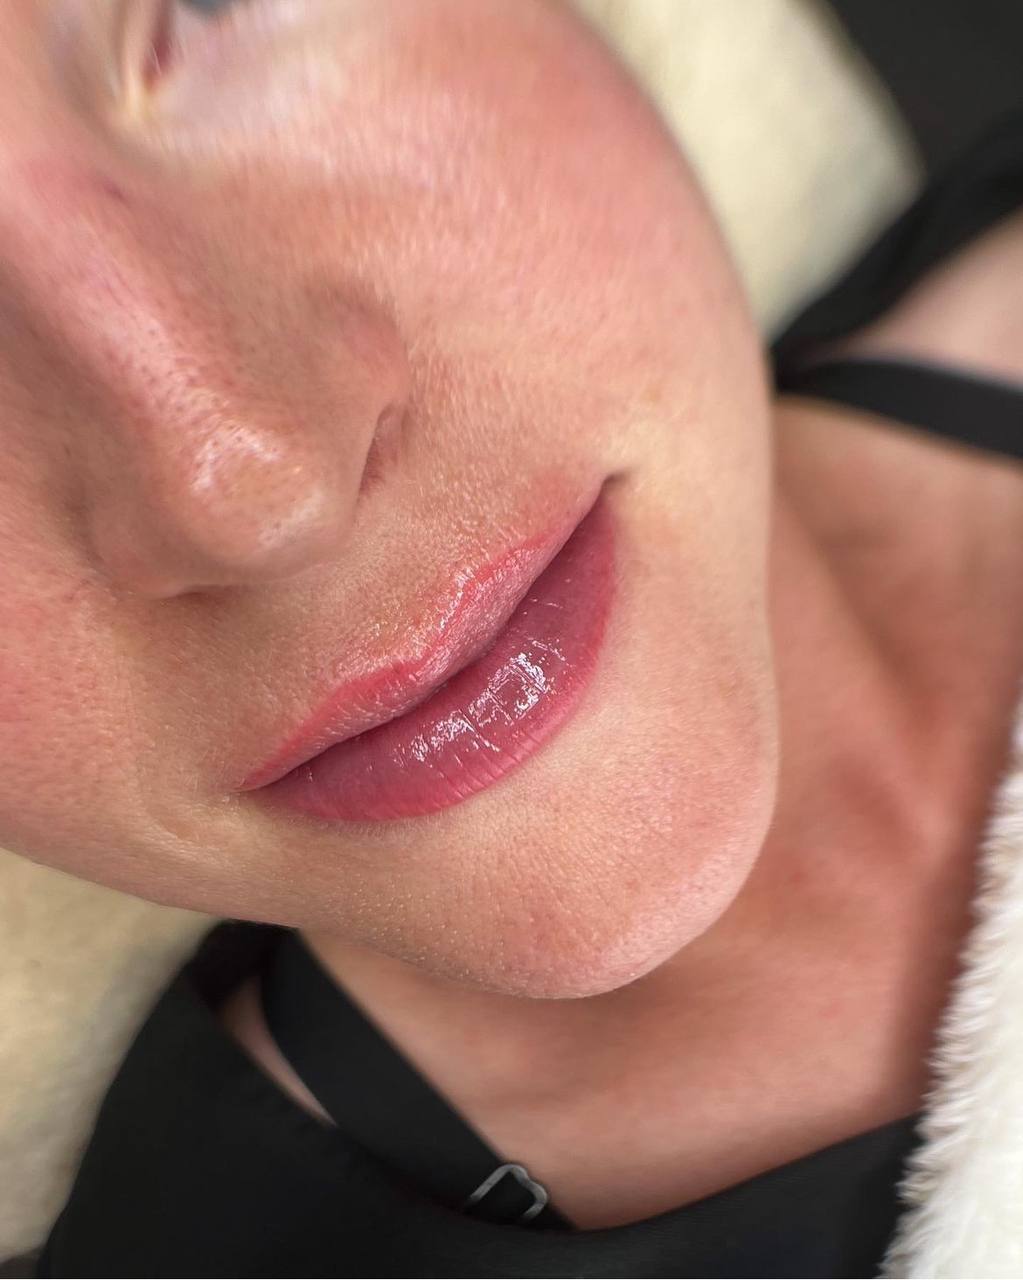 Lip Outline Cosmetic Tattoo. Cosmetic and Mediical Tattoo by Dasha. Permanent makeup and reconstructive tattoo, scalp micro-pigmentation in Christchurch, New Zealand